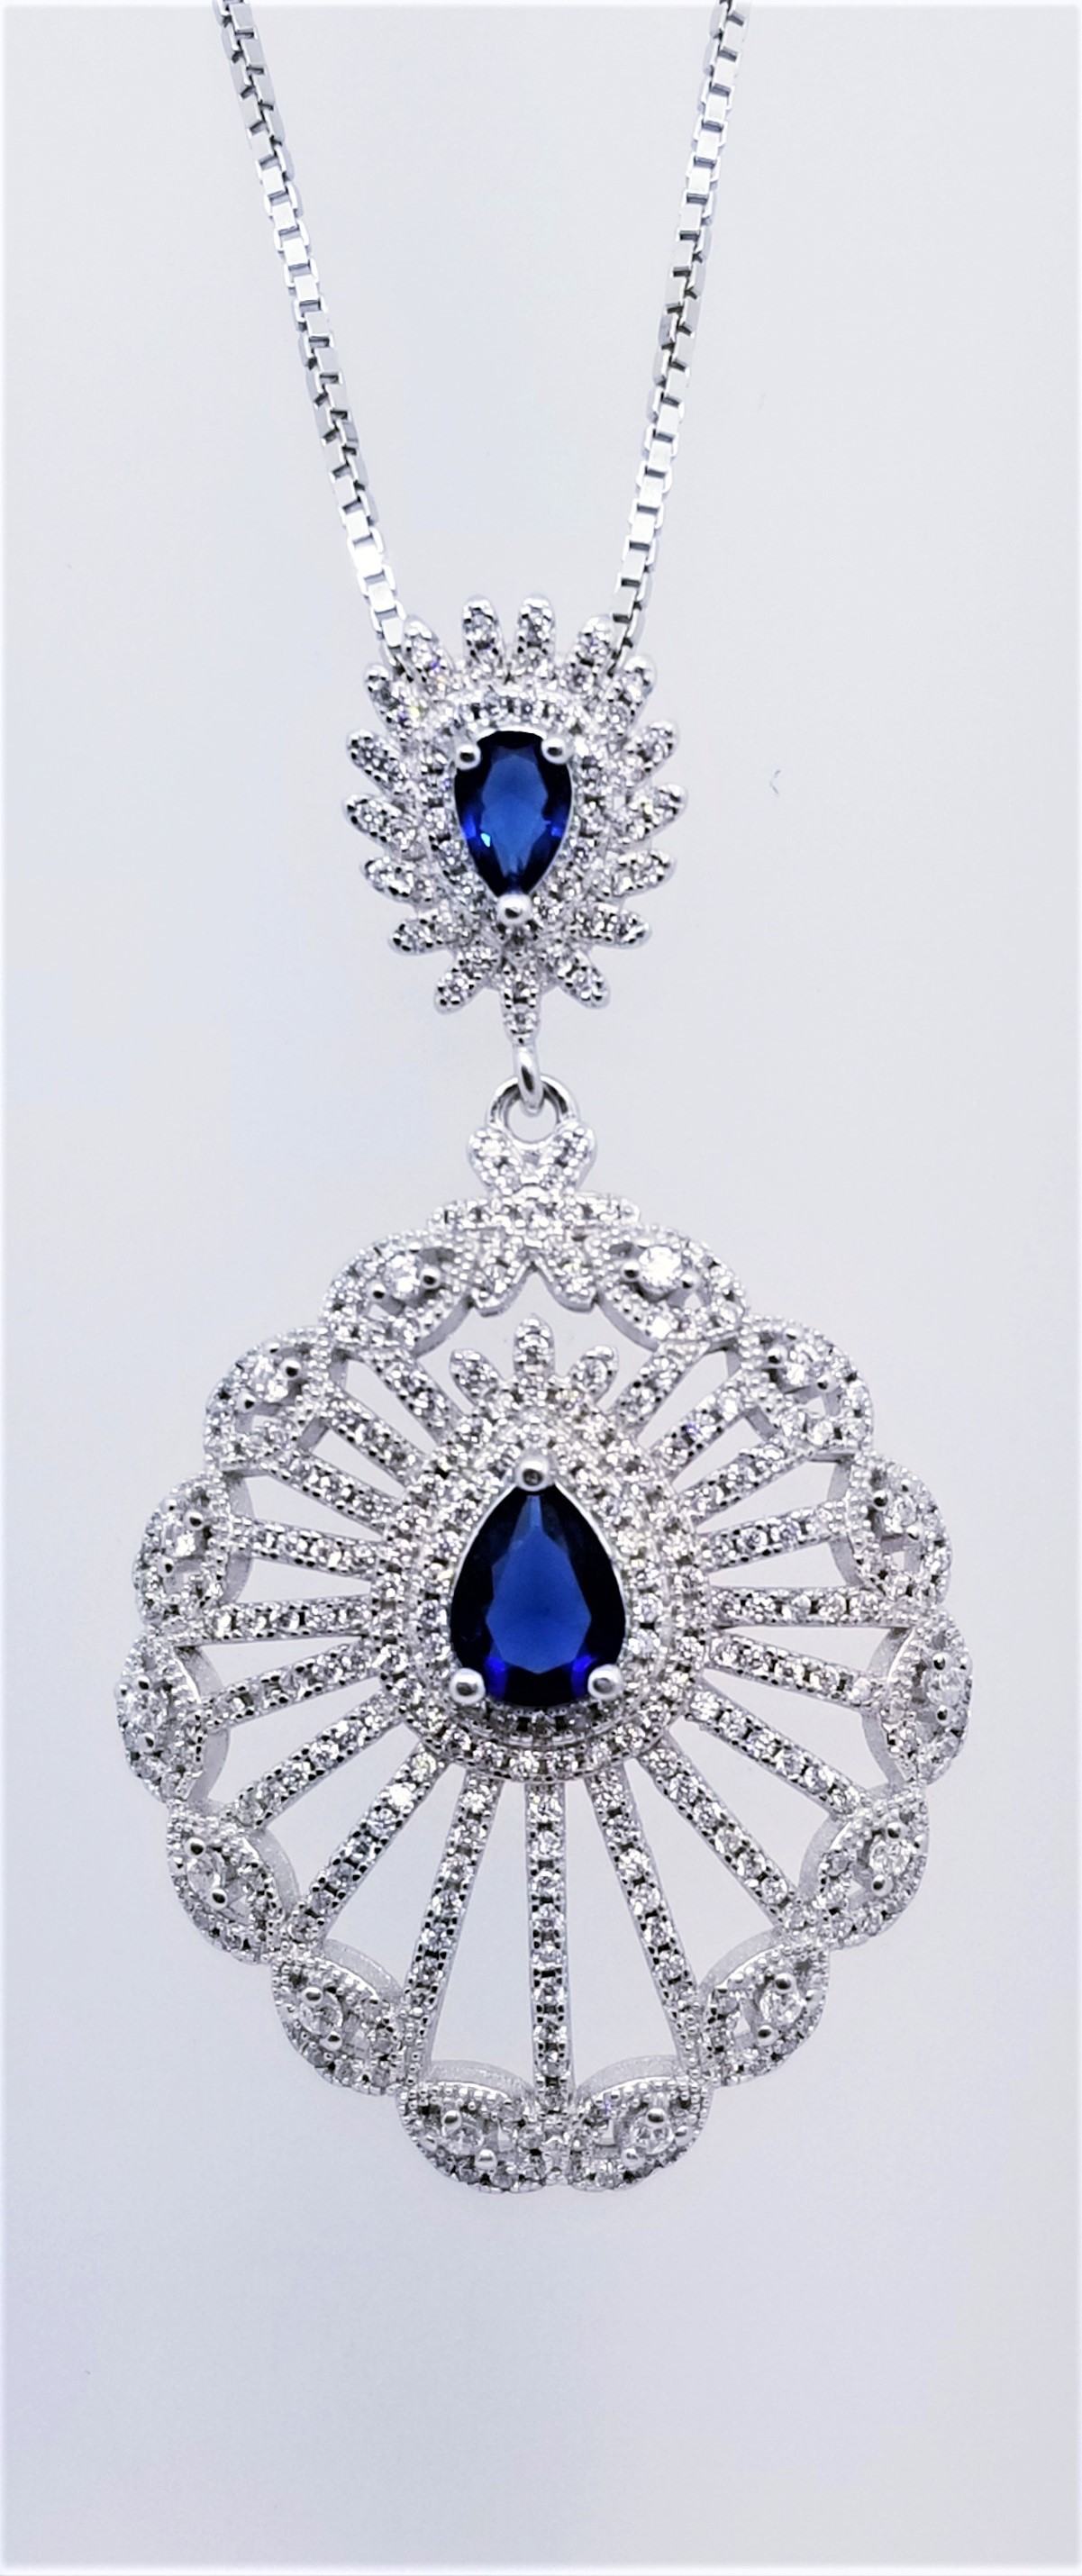 925 Sterling Silver Rhodium Tone Pendant With Sapphire And CZ Stones